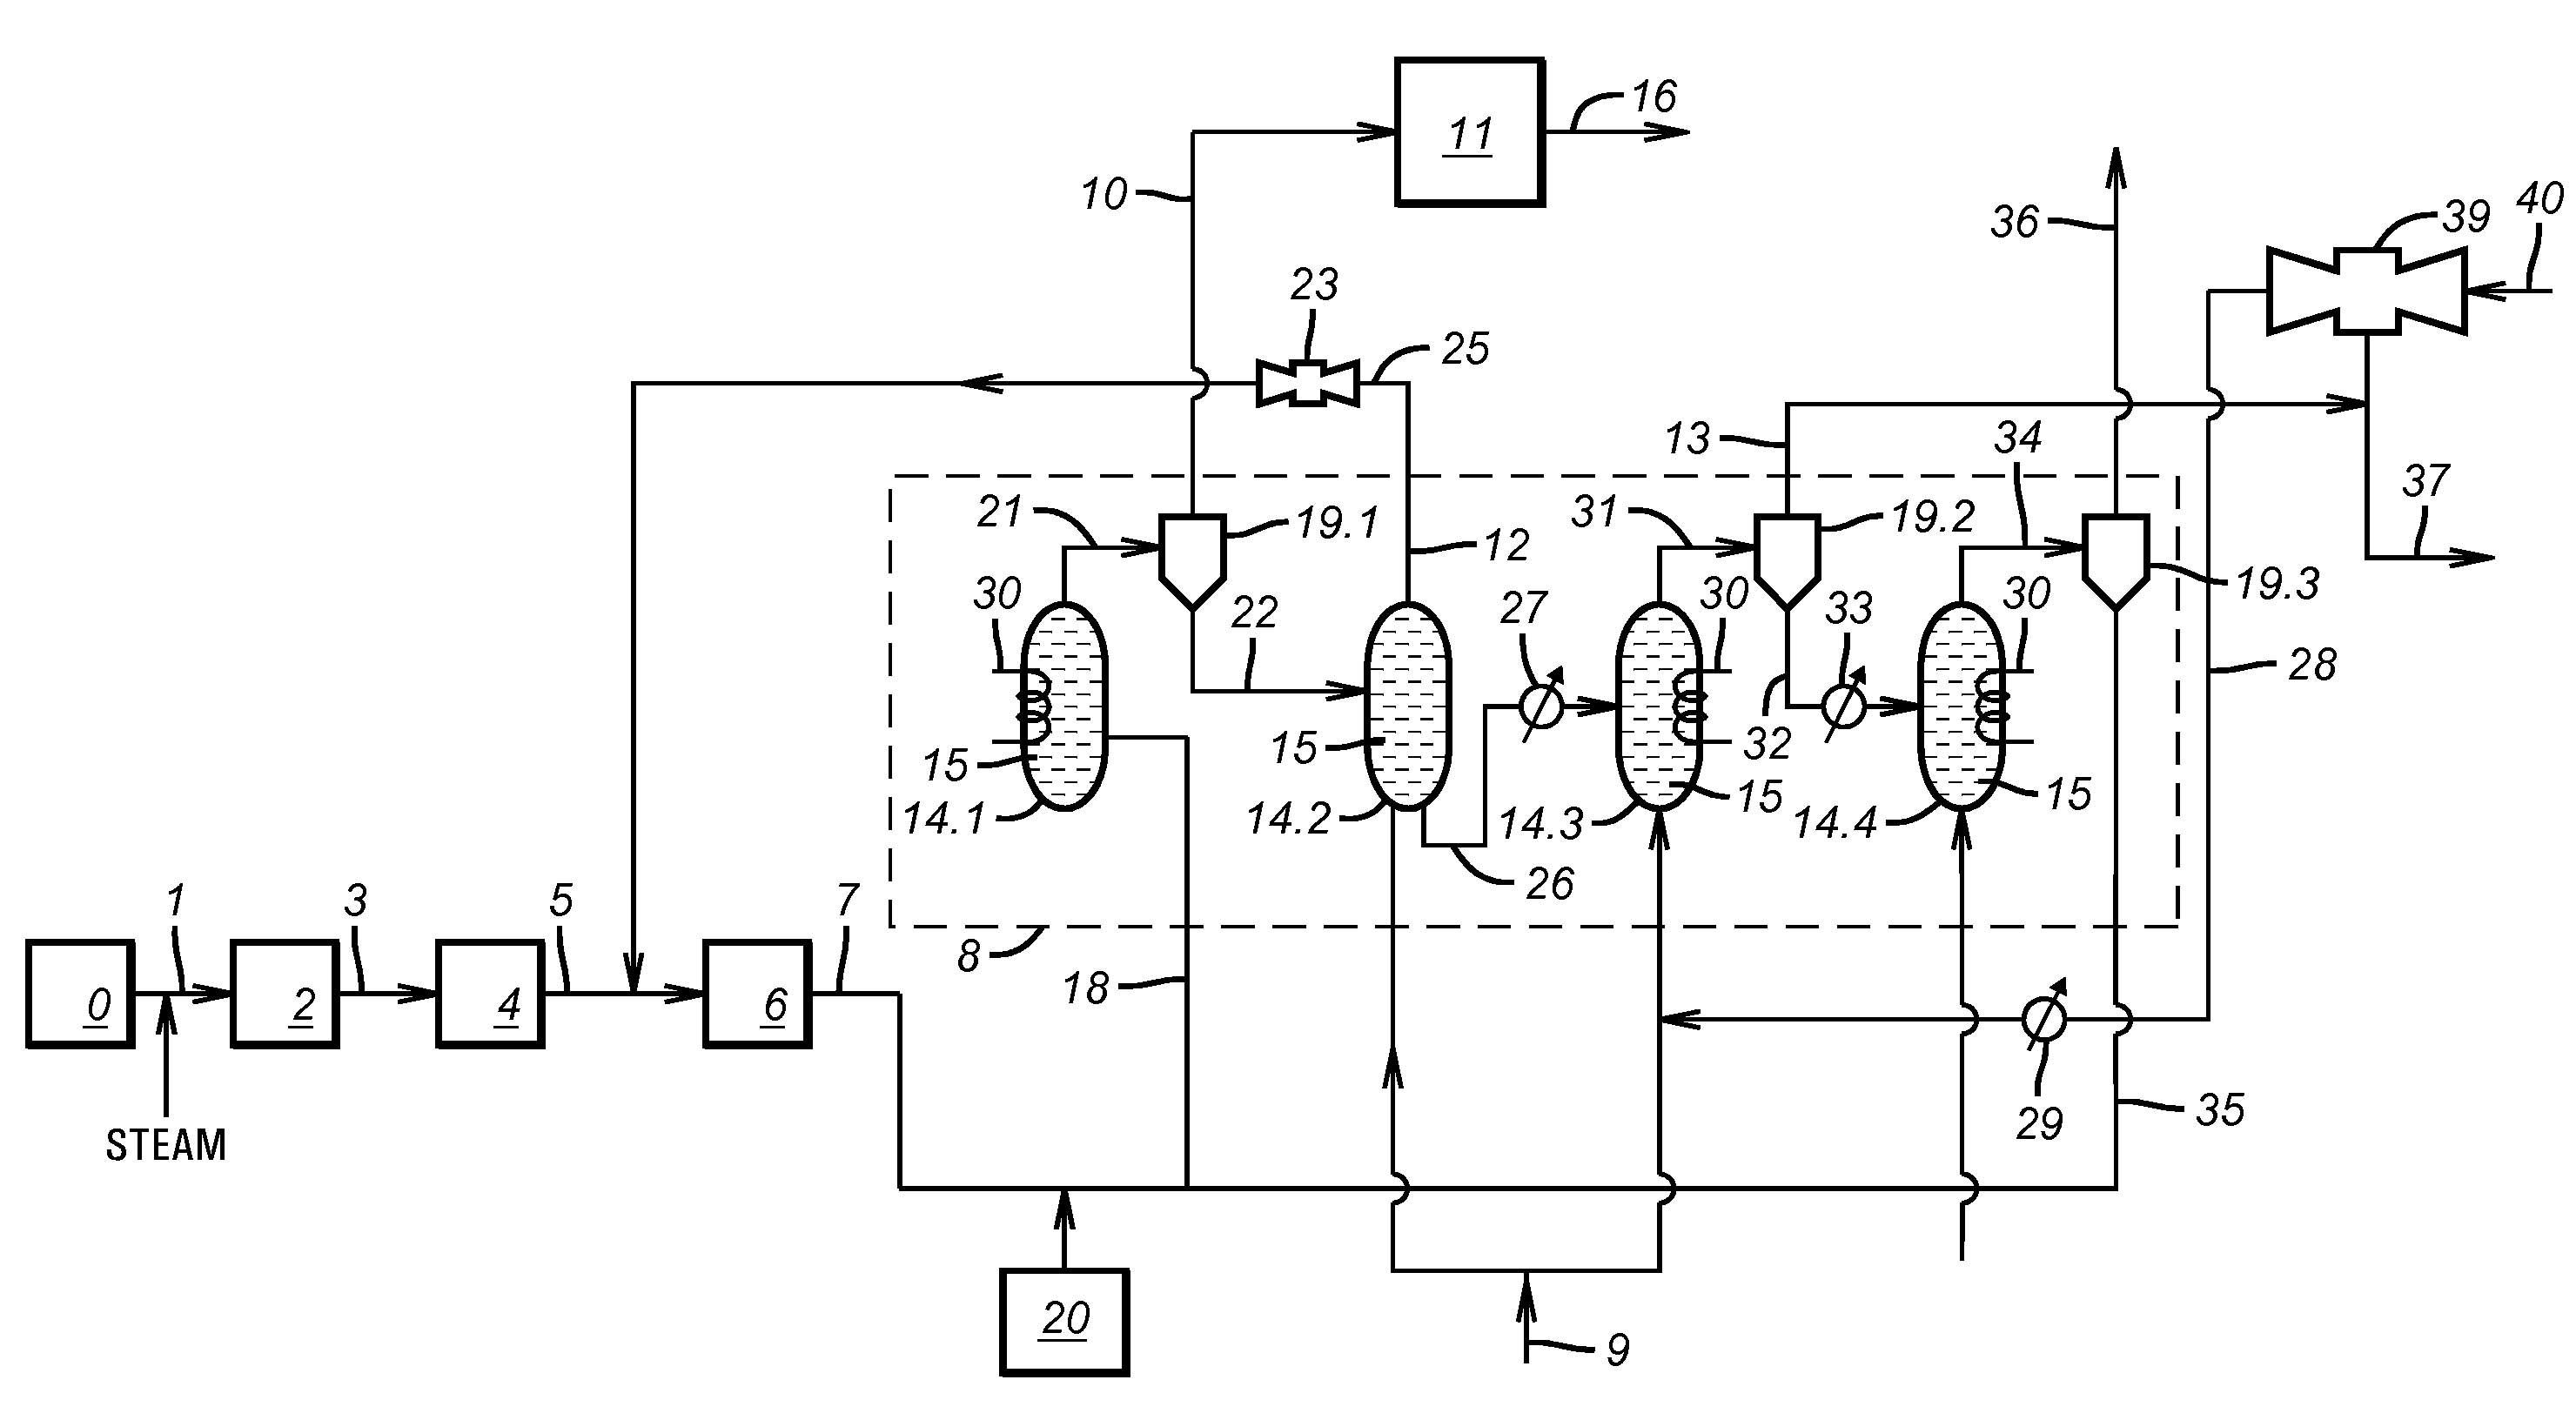 Process For The Production Of Hydrogen And Carbon Dioxide Utilizing Magnesium Based Sorbents